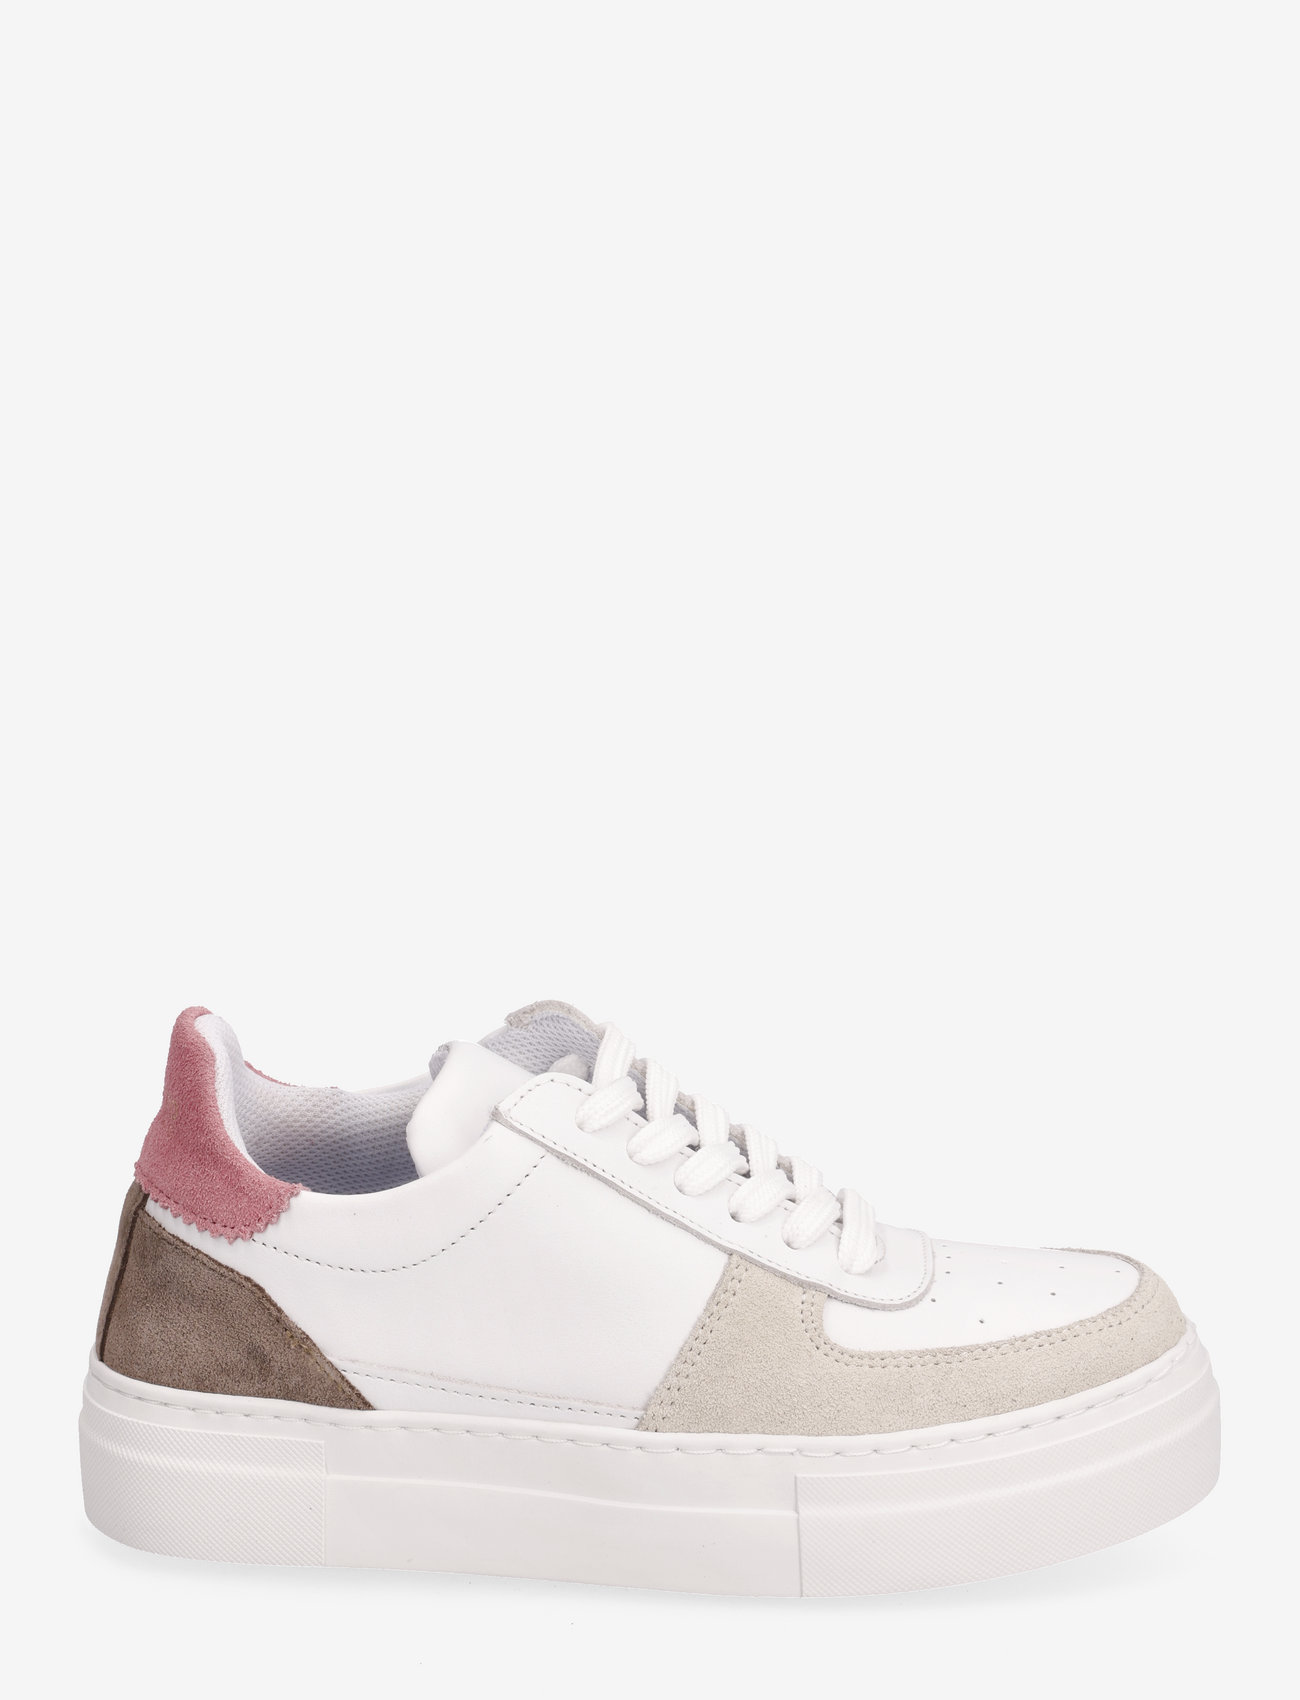 Selected Femme - SLFHARPER MIX TRAINER - lave sneakers - sweet lilac - 1